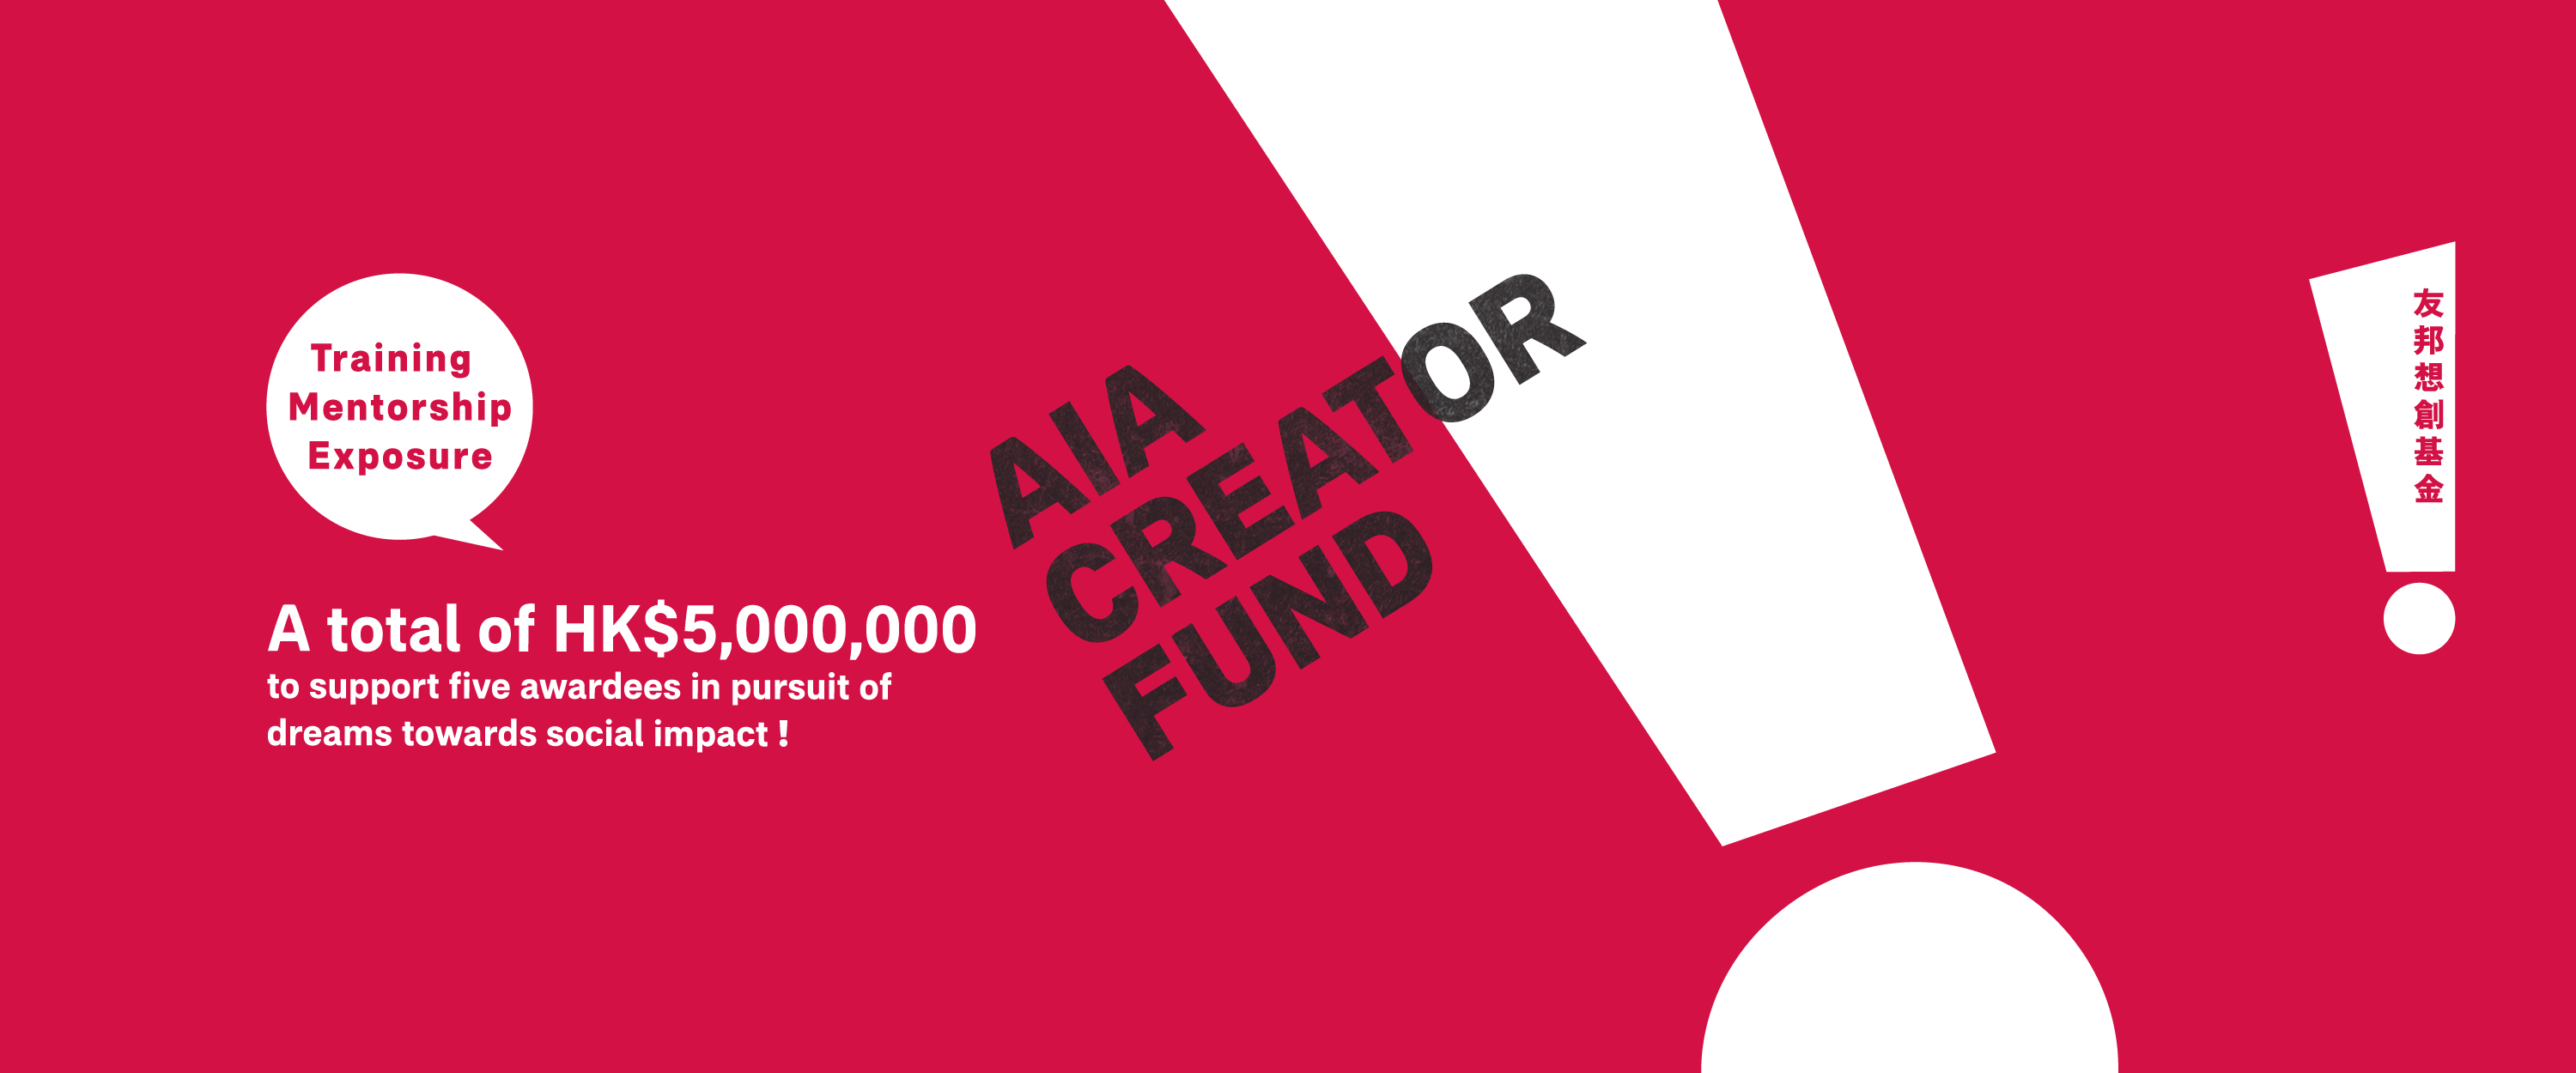 AIA Creator Fund will provide a total of HK$5 million, training, mentorship, and exposure to support 5 awardees in pursuit of dreams towards social impact.